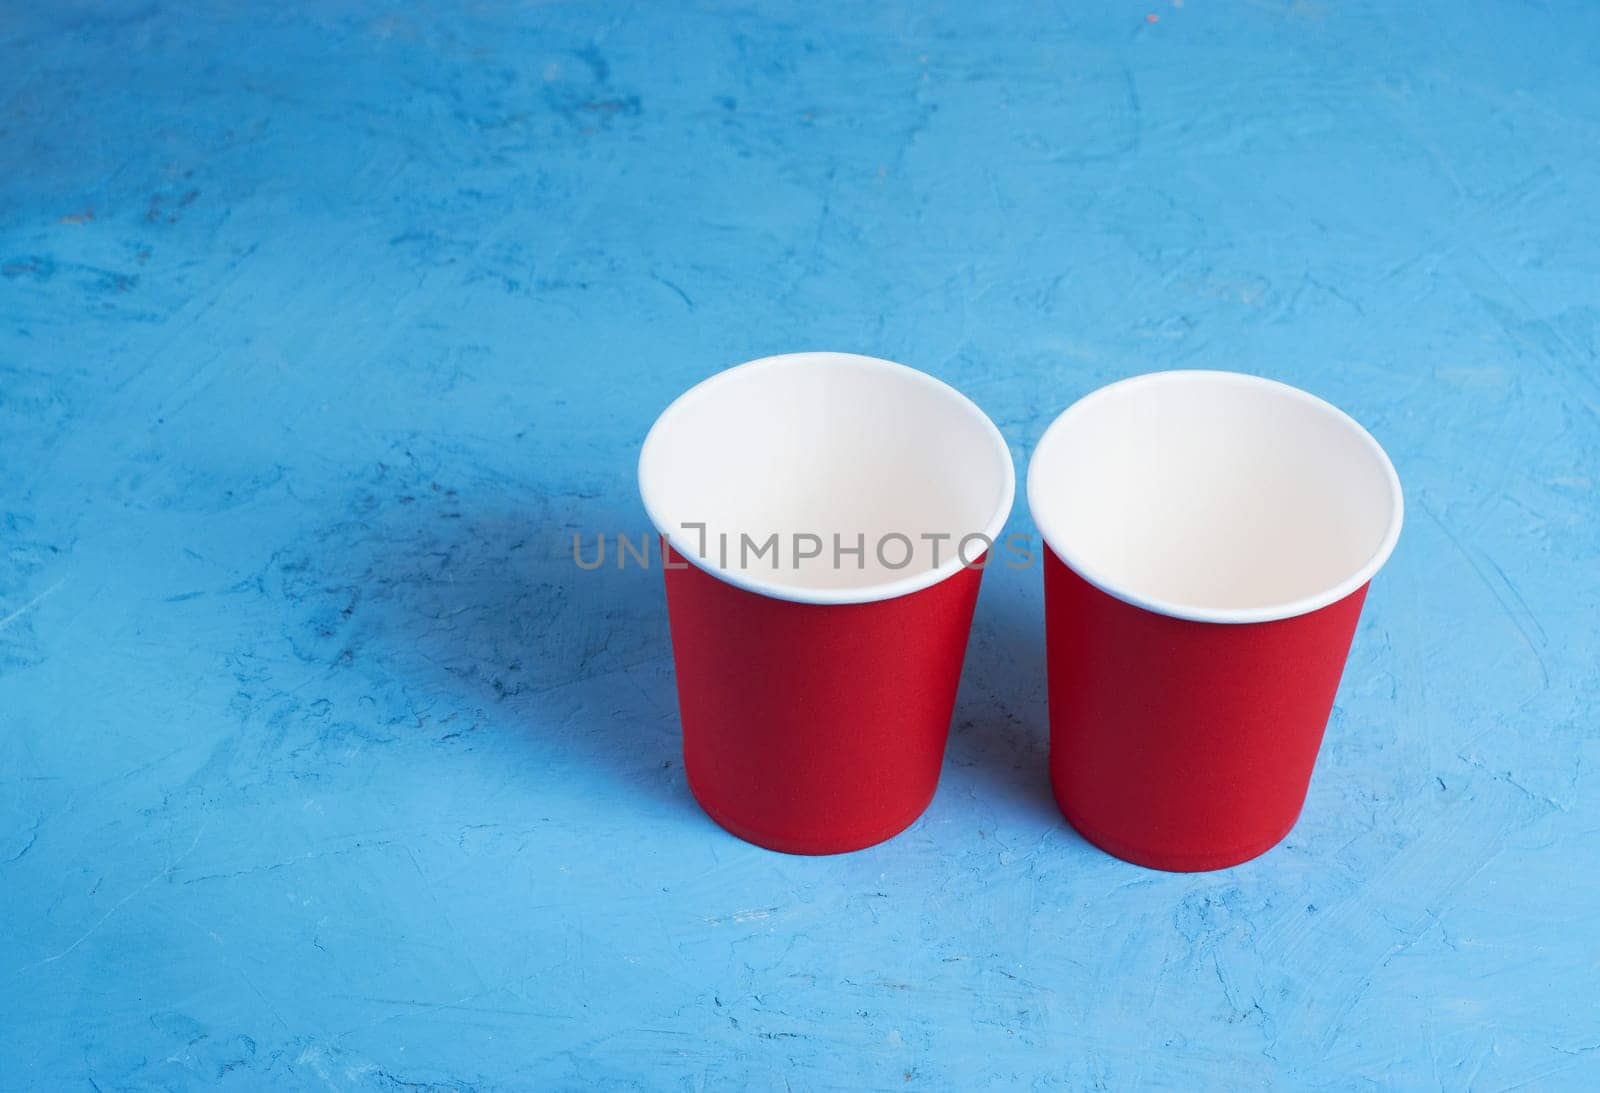 Two red paper coffee cups on a blue background. Morning concept.